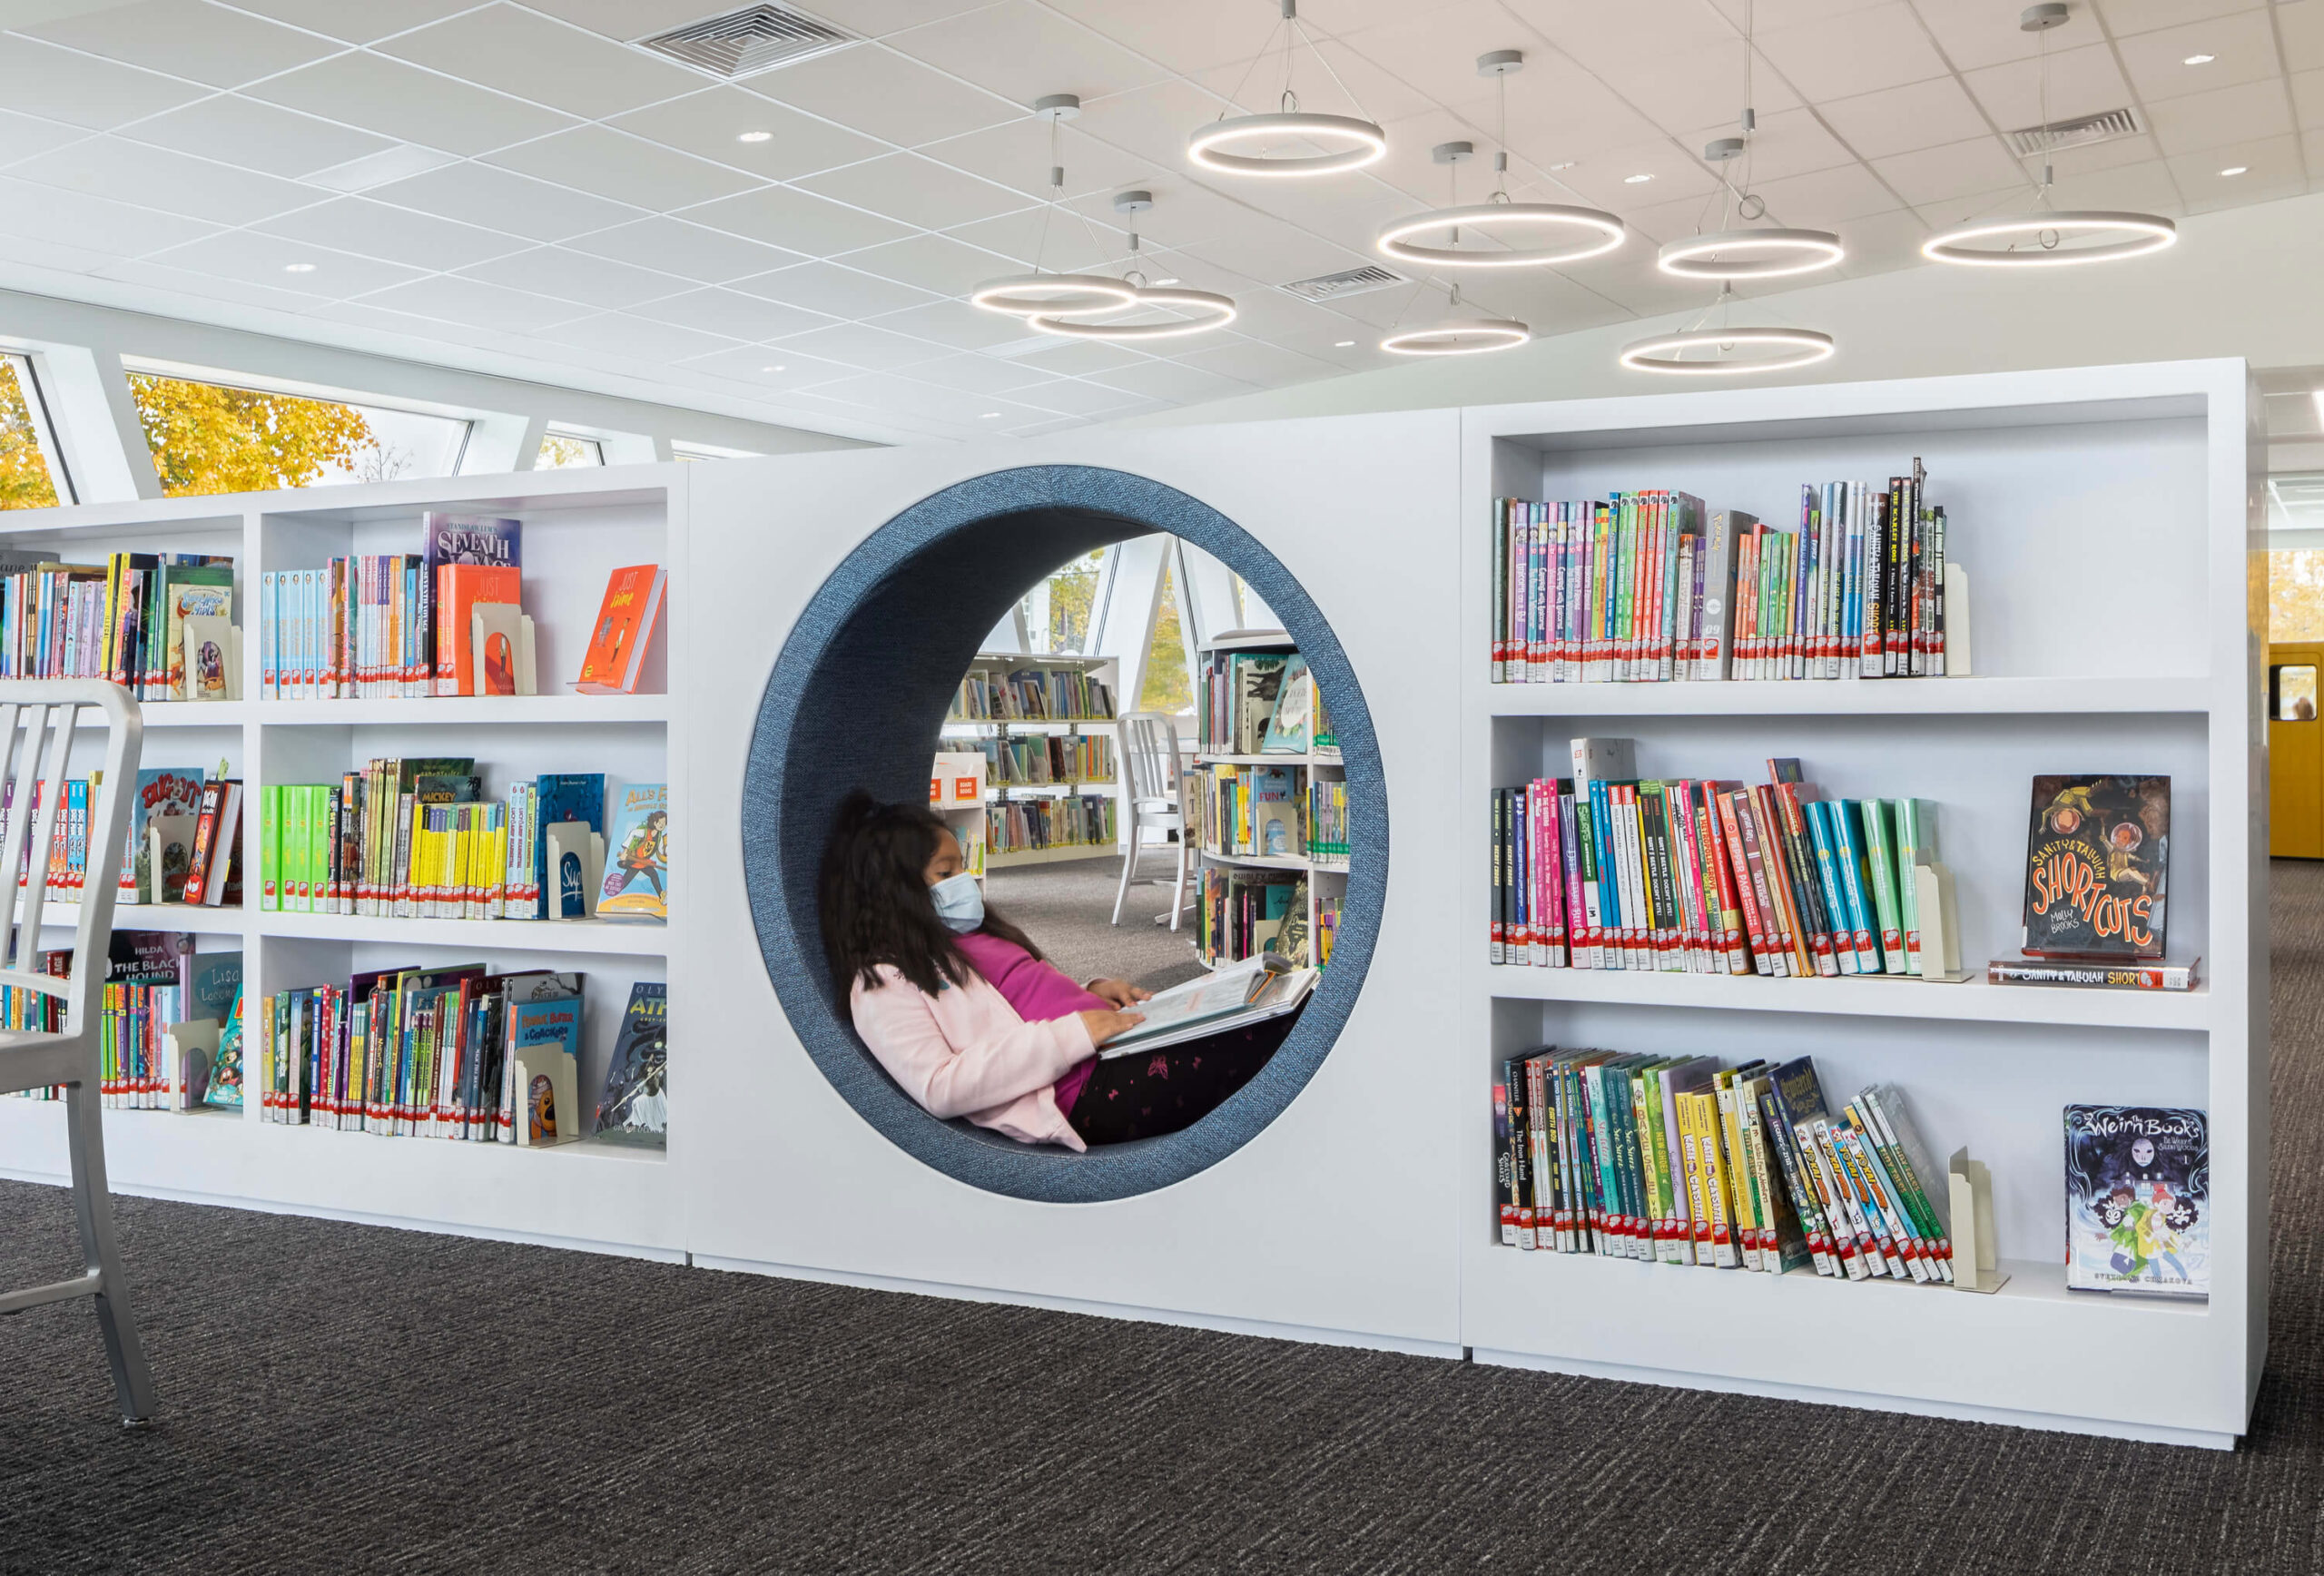 : a young girl reads a book while sitting inside a circular nook built within the bookshelves